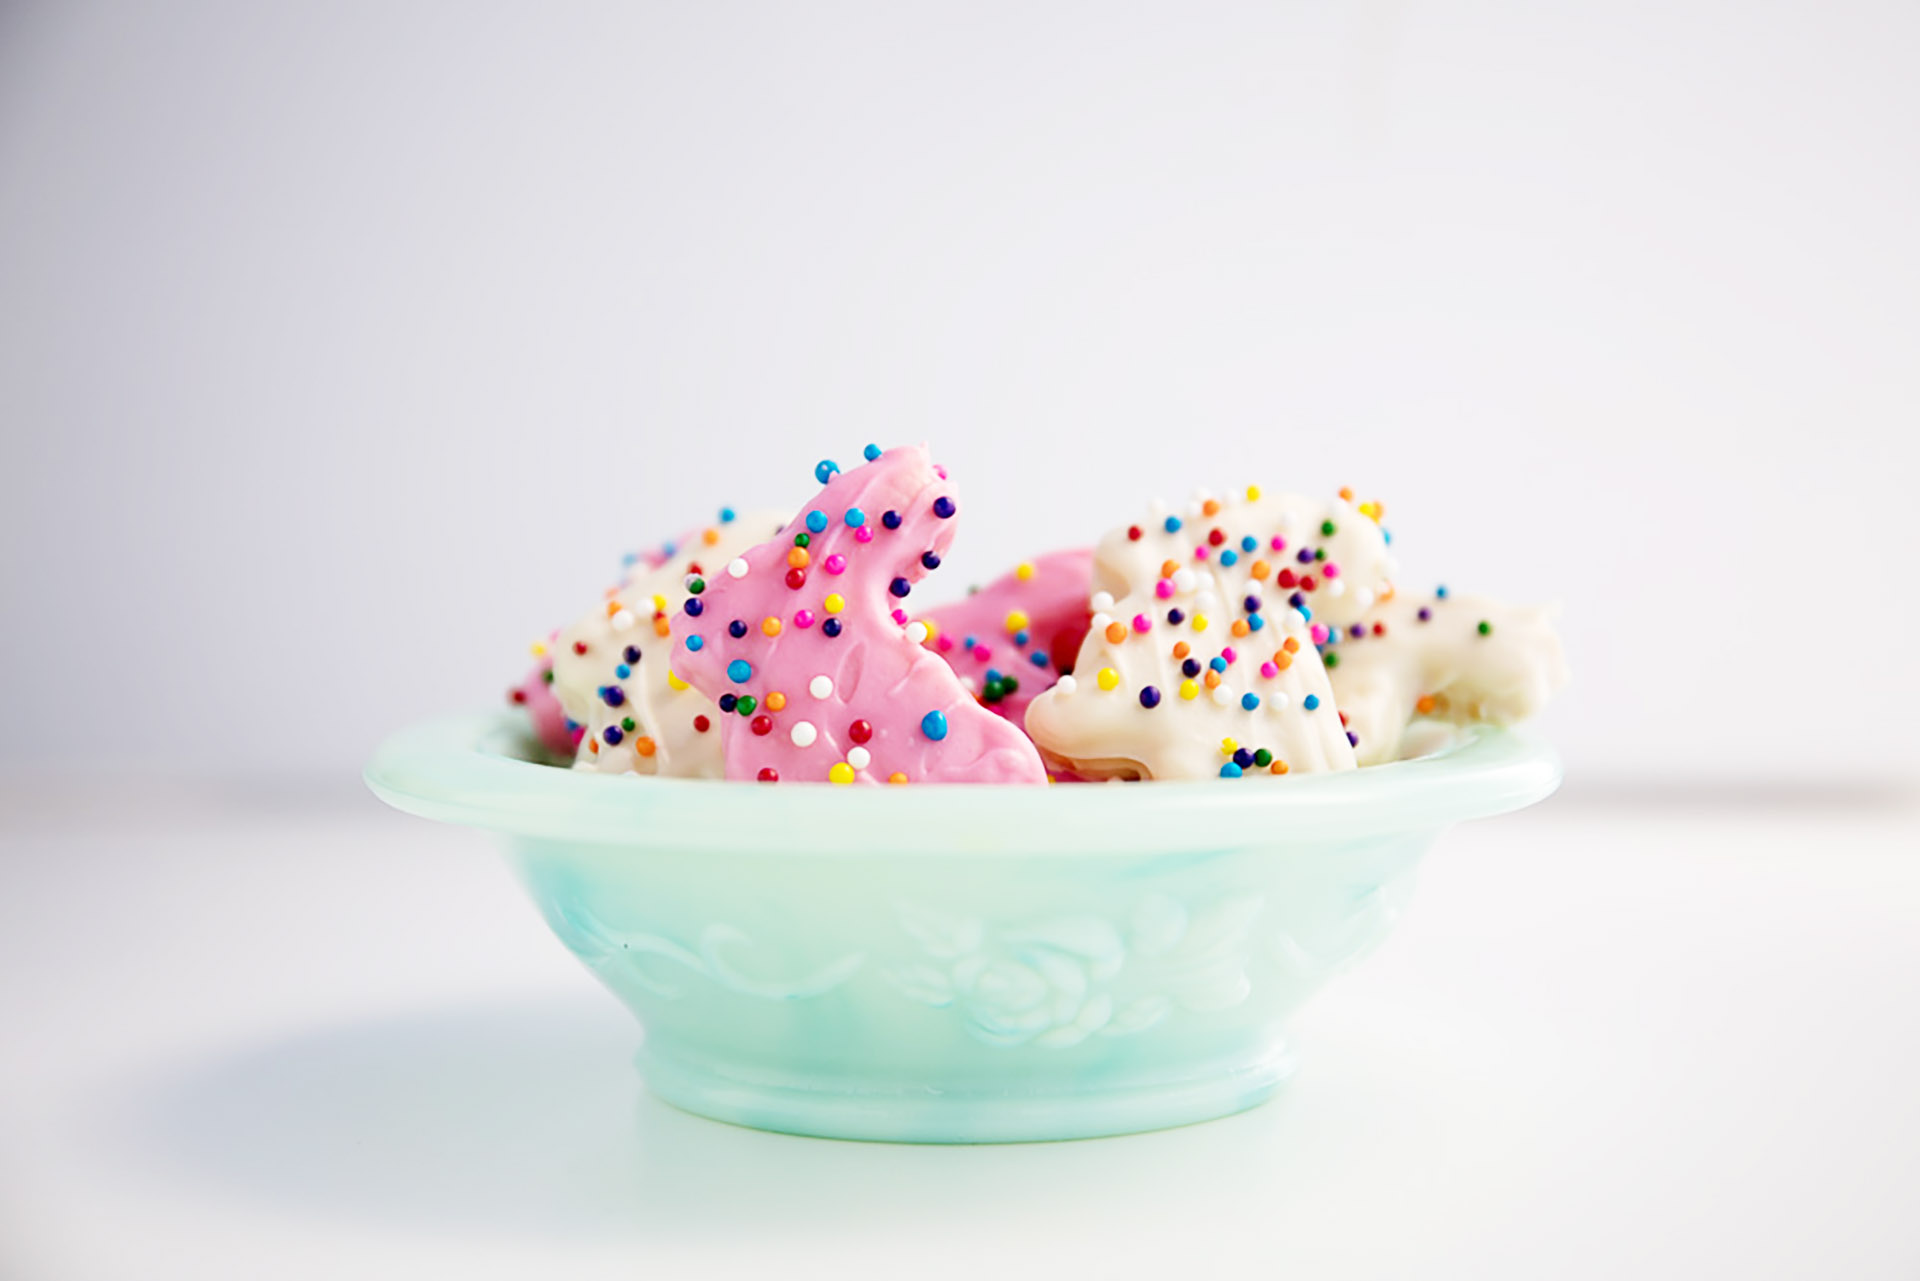 A light green glass bowl filled with pink and white frosted animal cookies with colorful sprinkles on top.